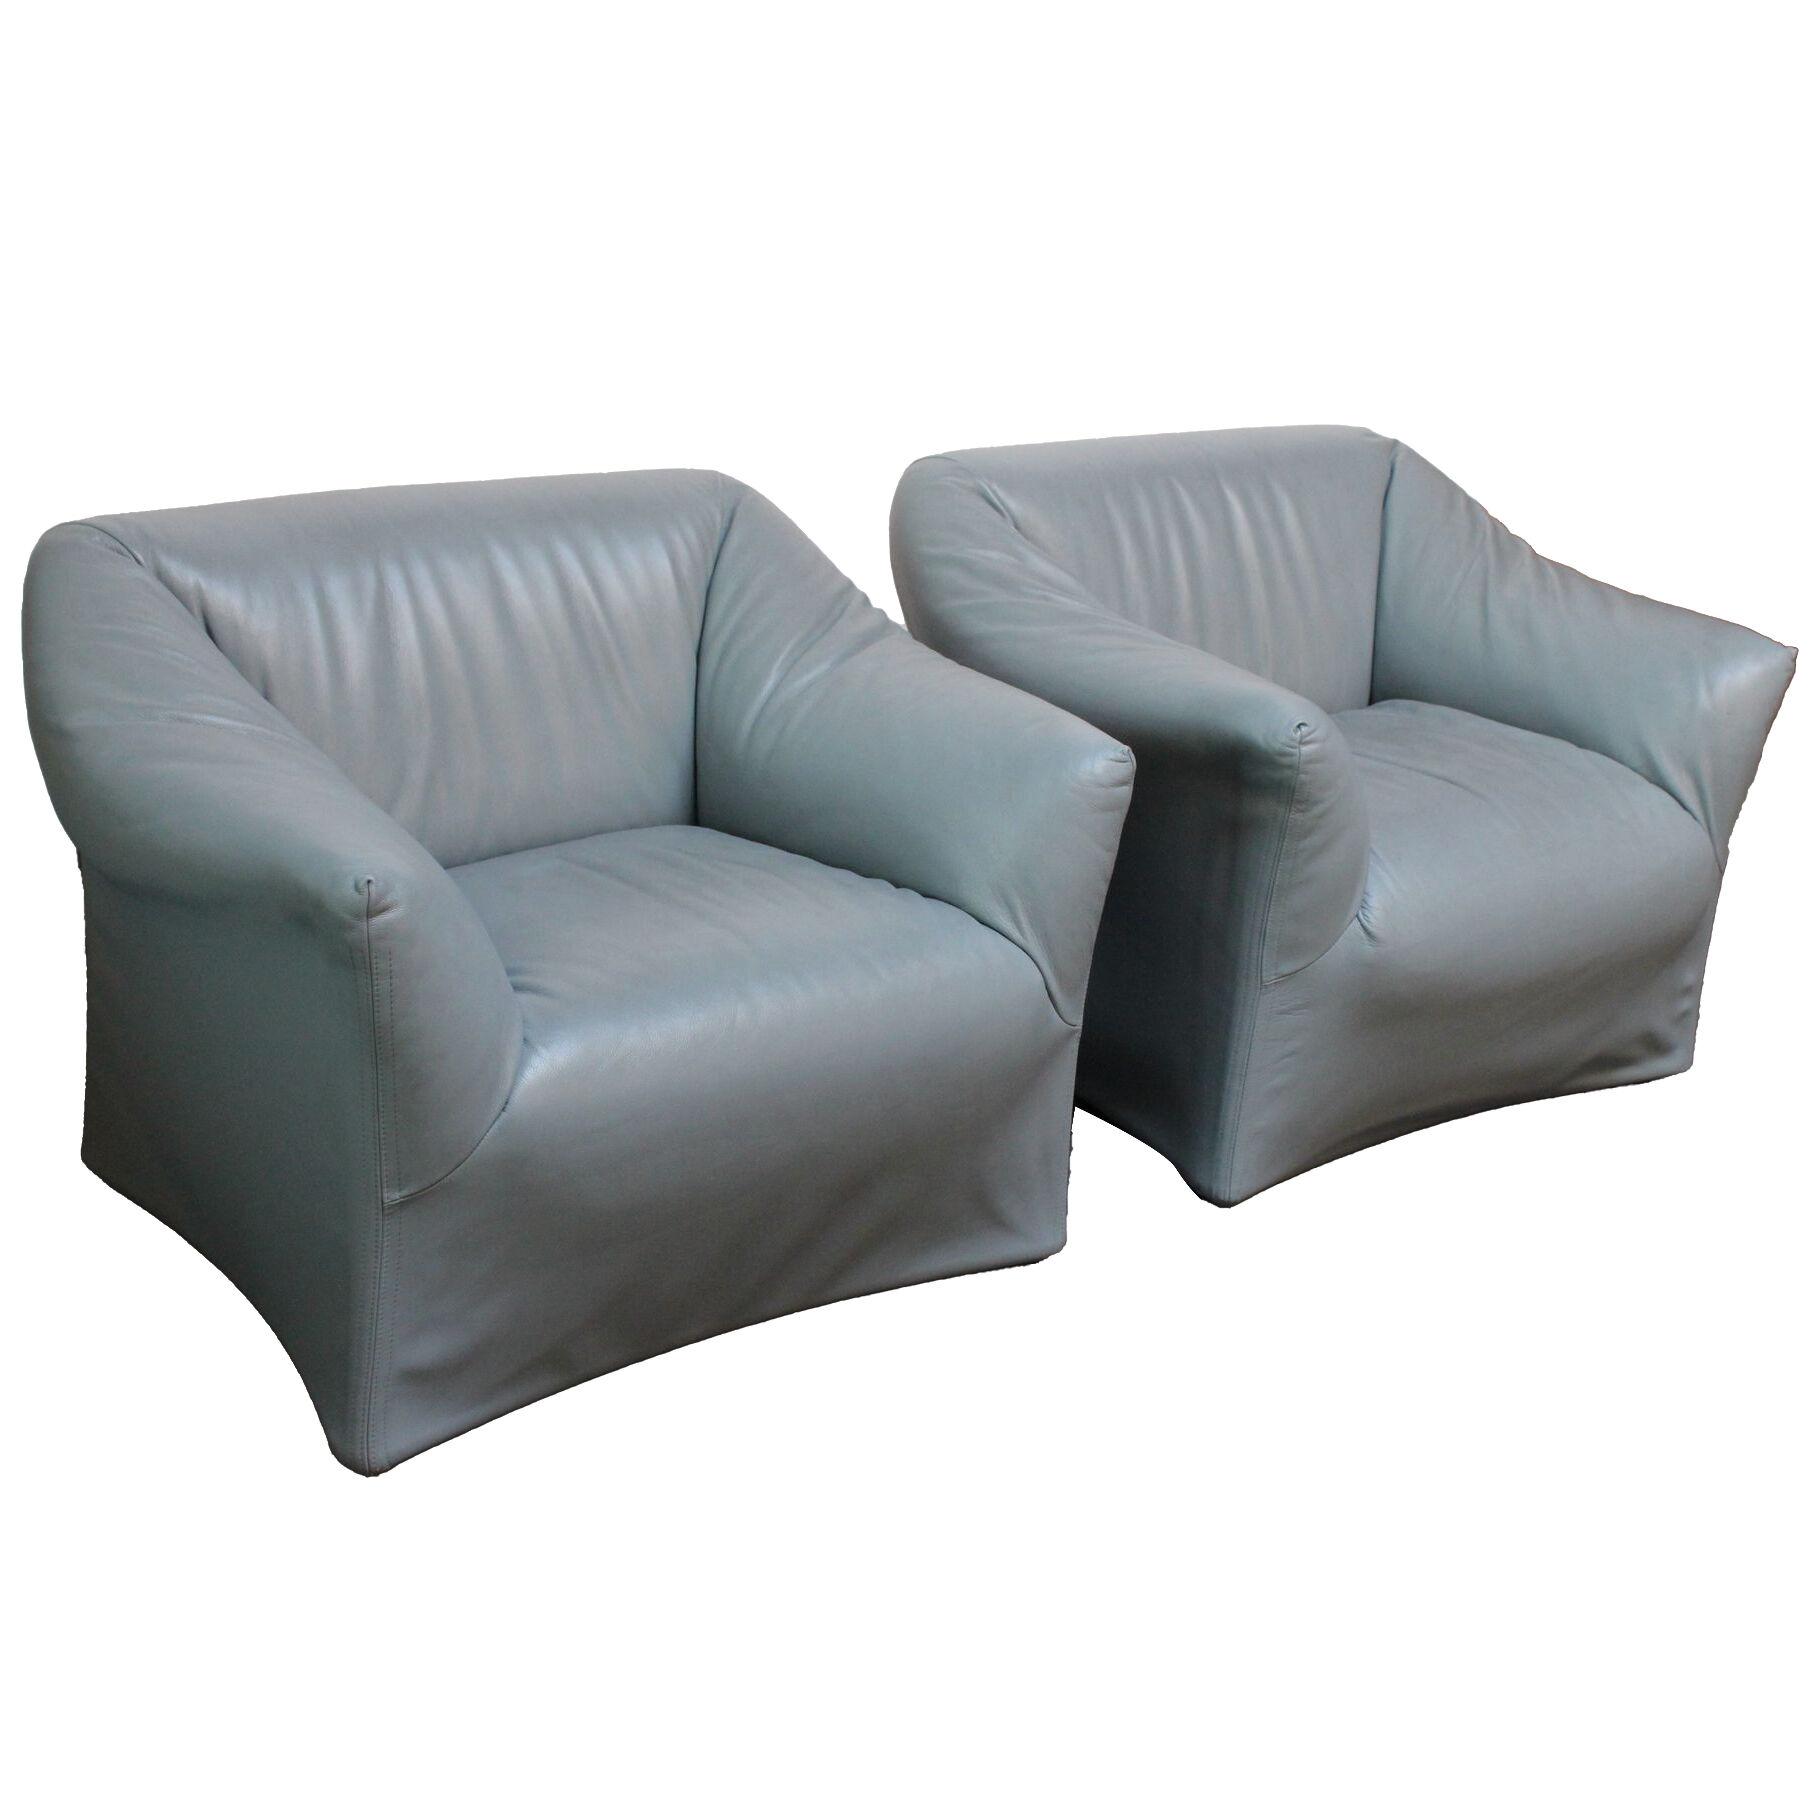 Pair of Italian Wide Leather Tentazione Club Chairs by Mario Bellini for Cassina